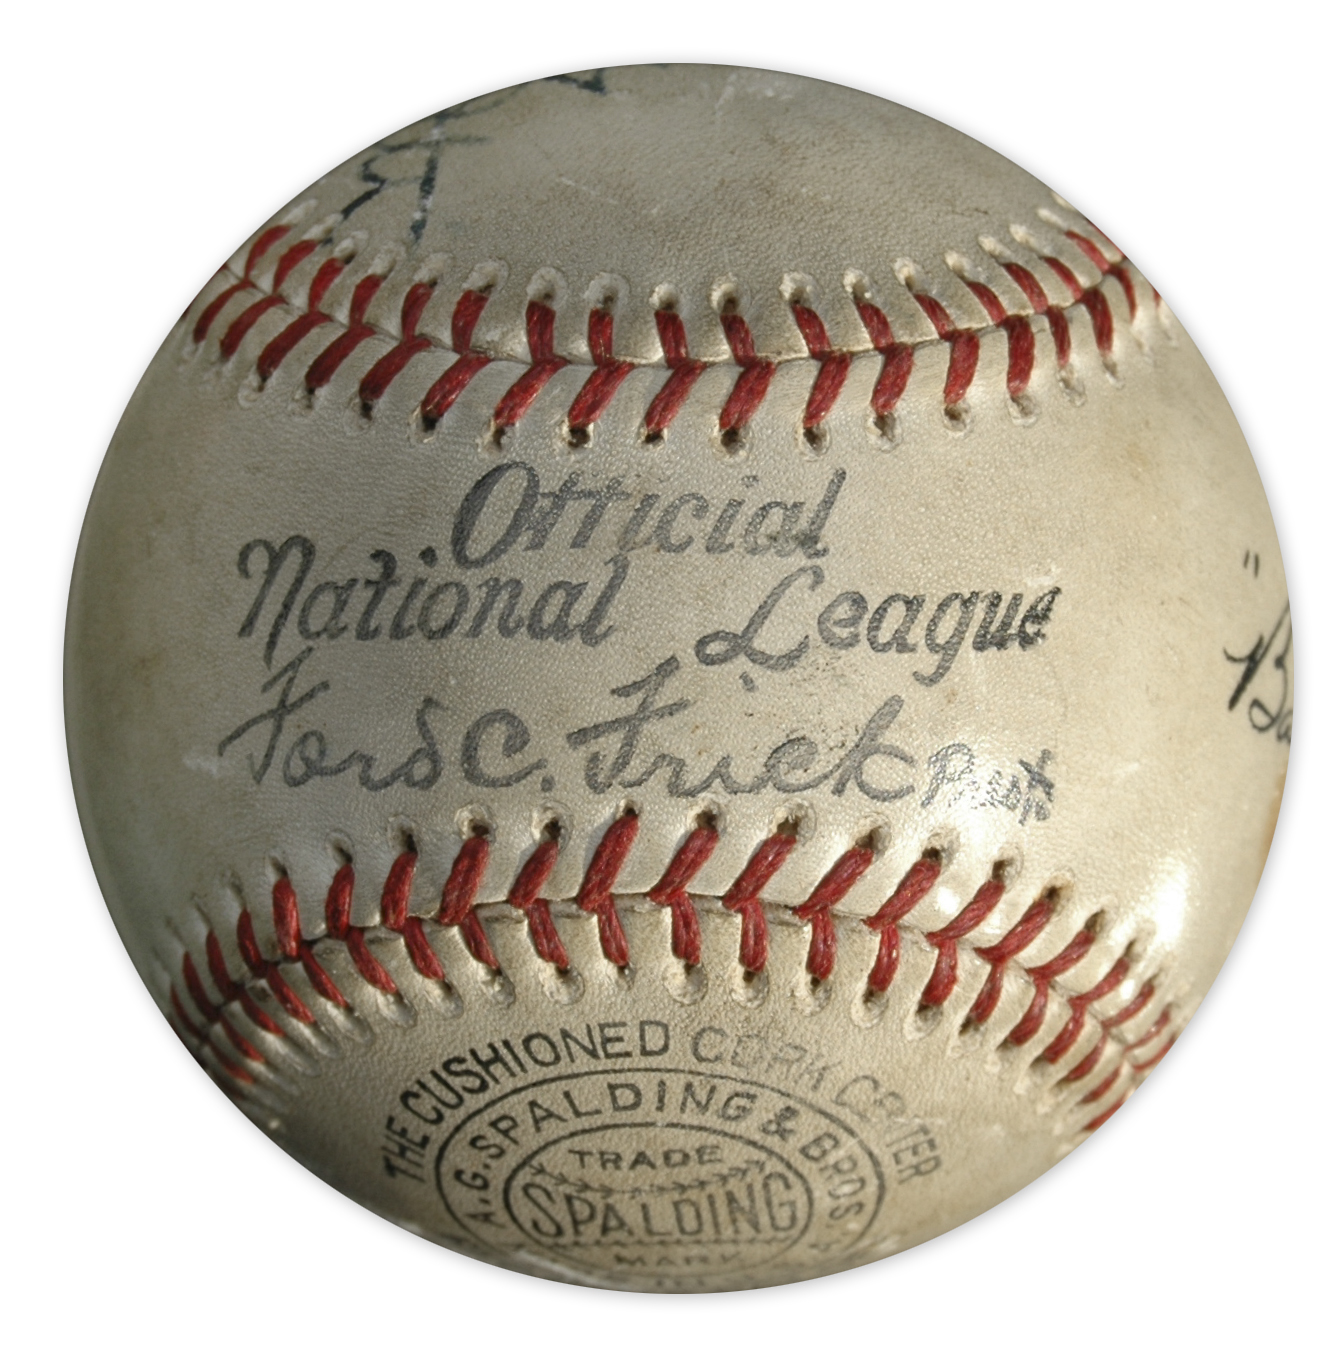 Babe Ruth Signed Baseball -- ''Sincerely / Babe Ruth'' ...